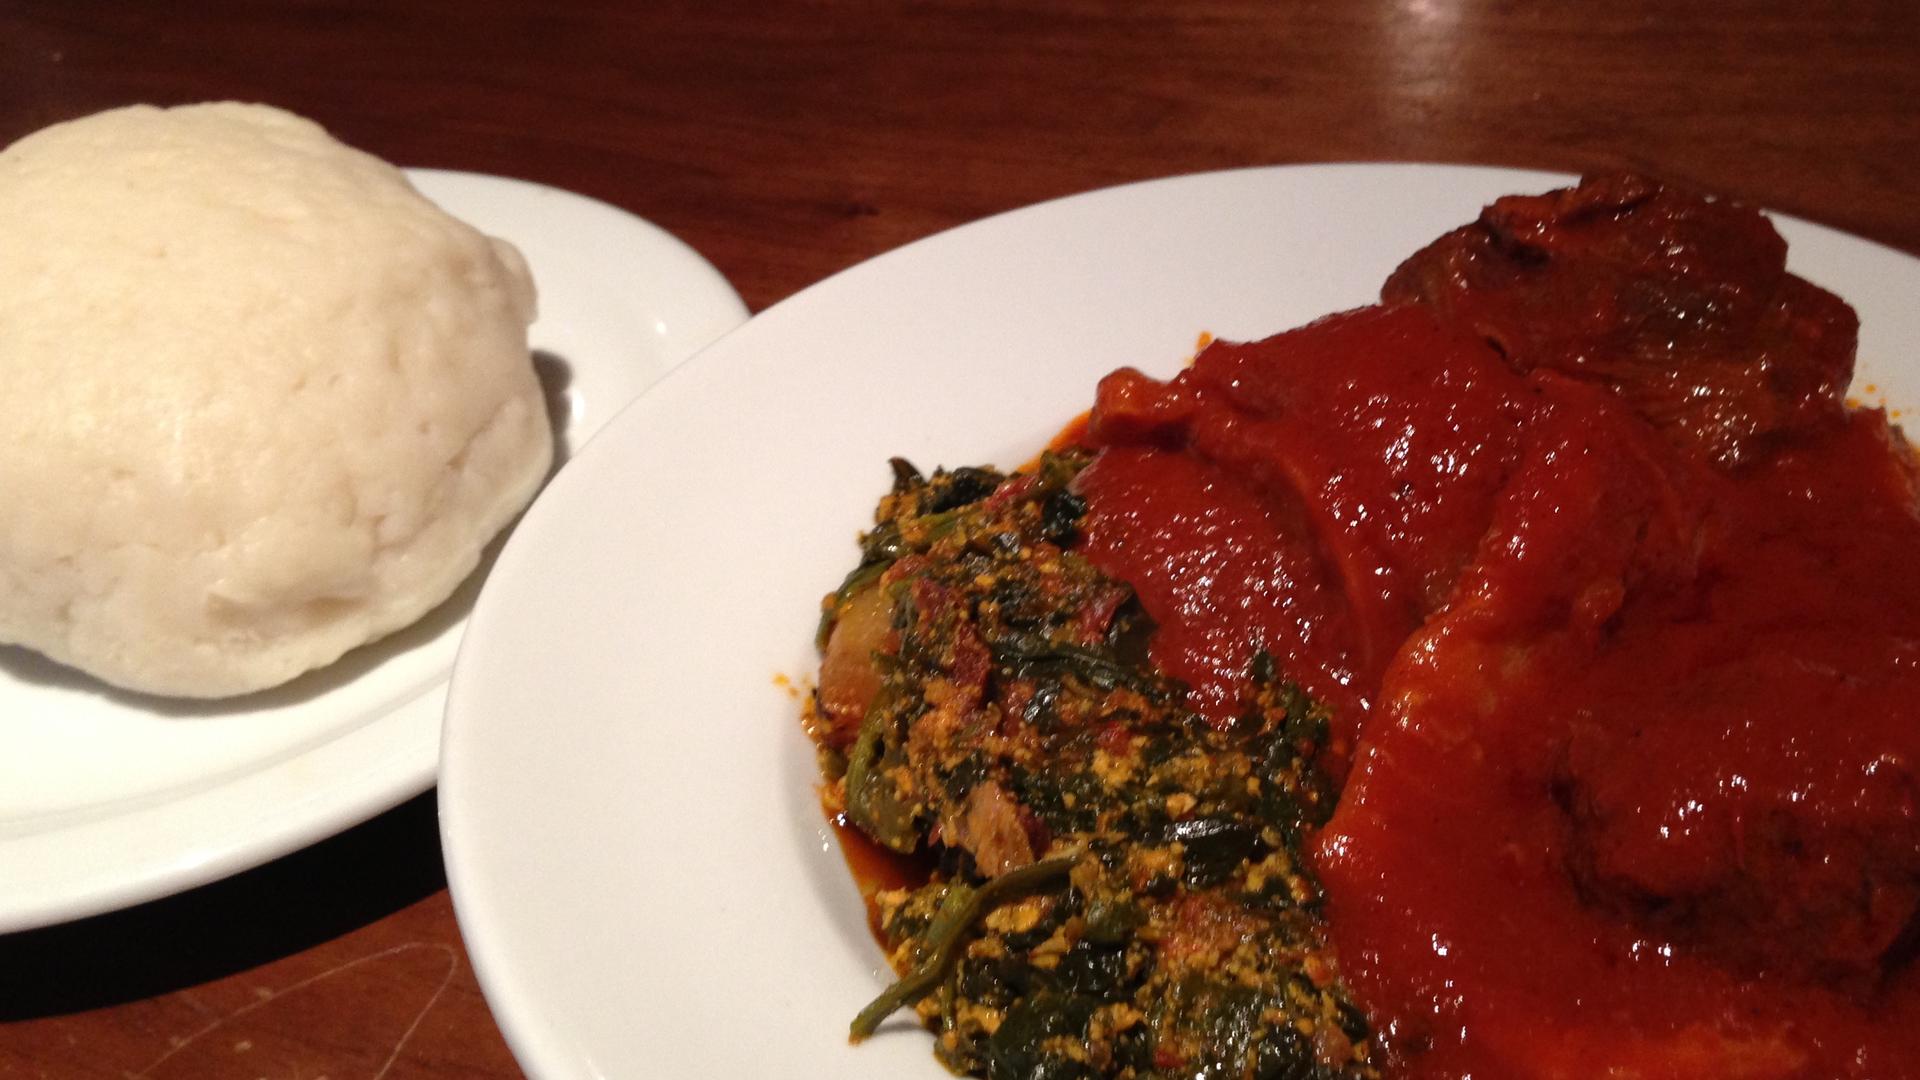 A plate of white fufu with another plate of food with red sauce